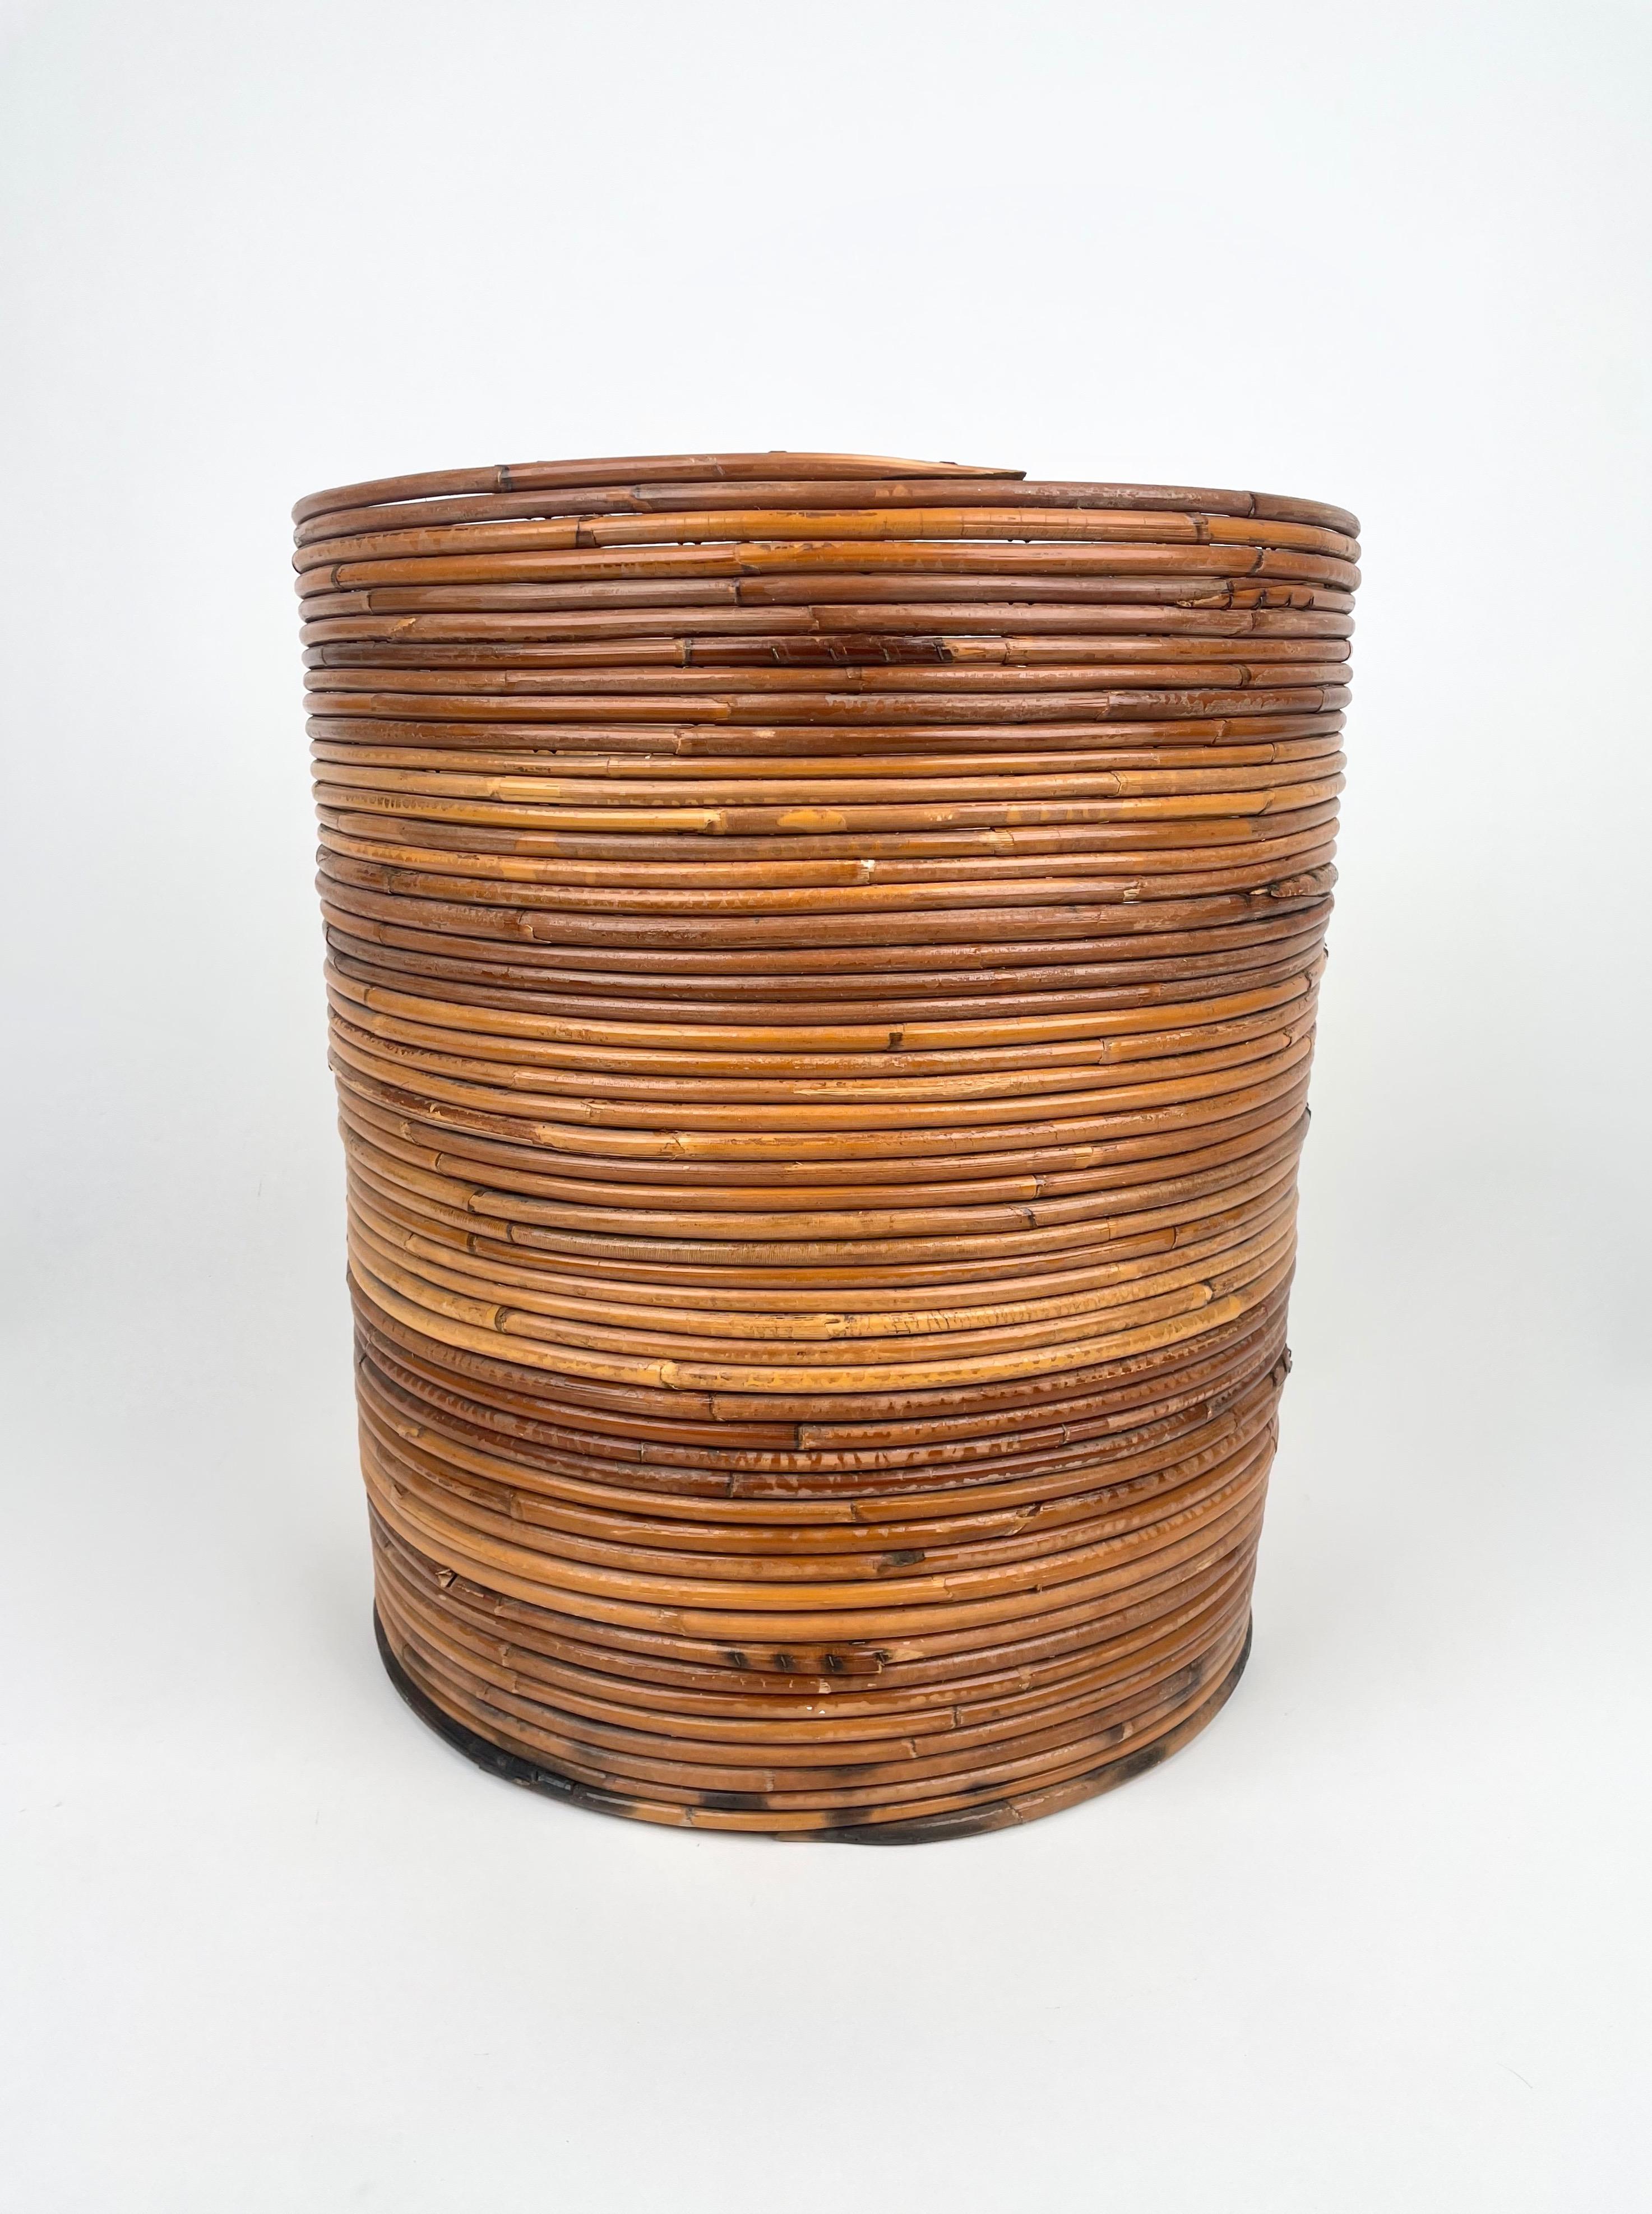 Rattan and Bamboo Round Basket Plant Holder Vase, Italy, 1960s For Sale 3